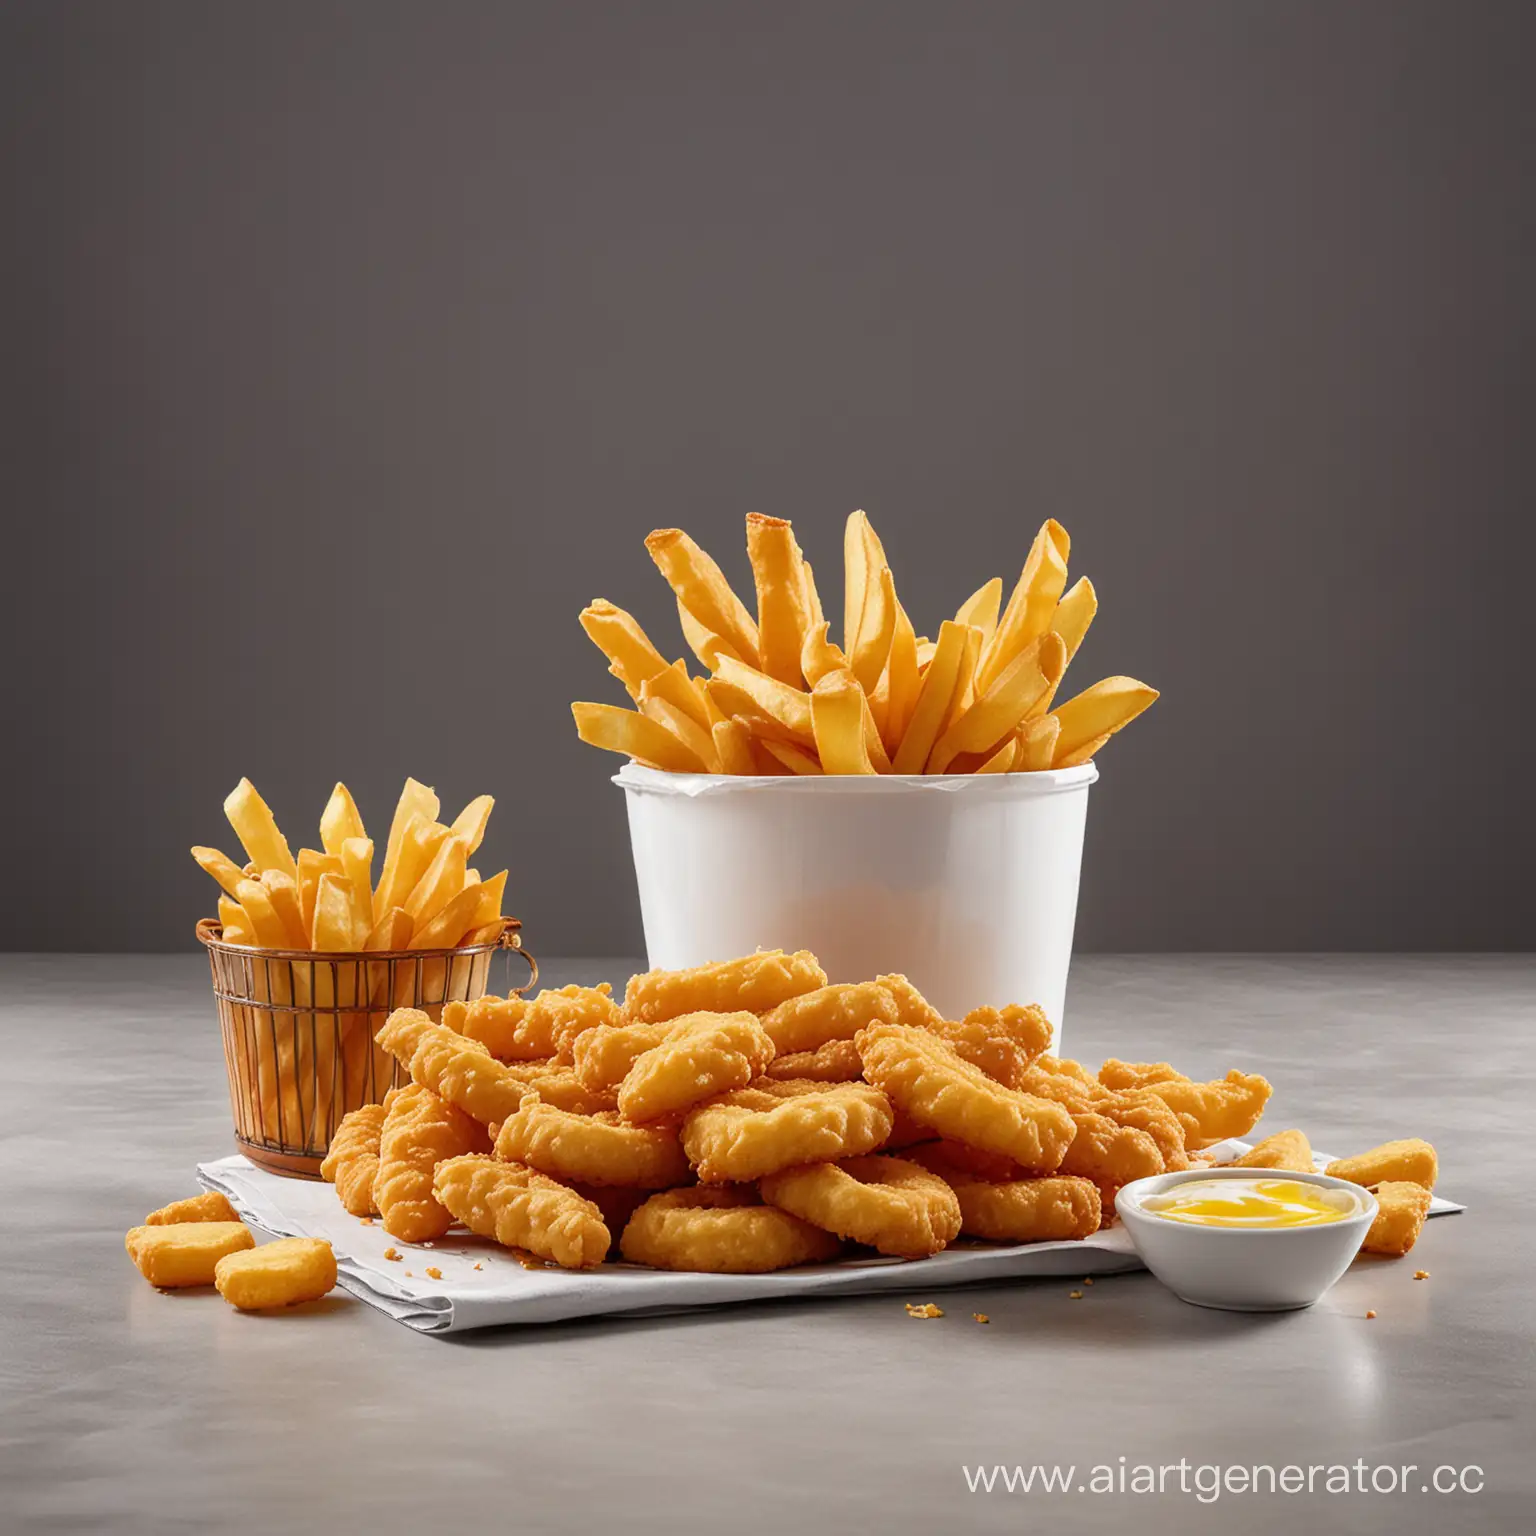 fryer oil advertisement 5 liters light background (fries, nuggets, onion rings)